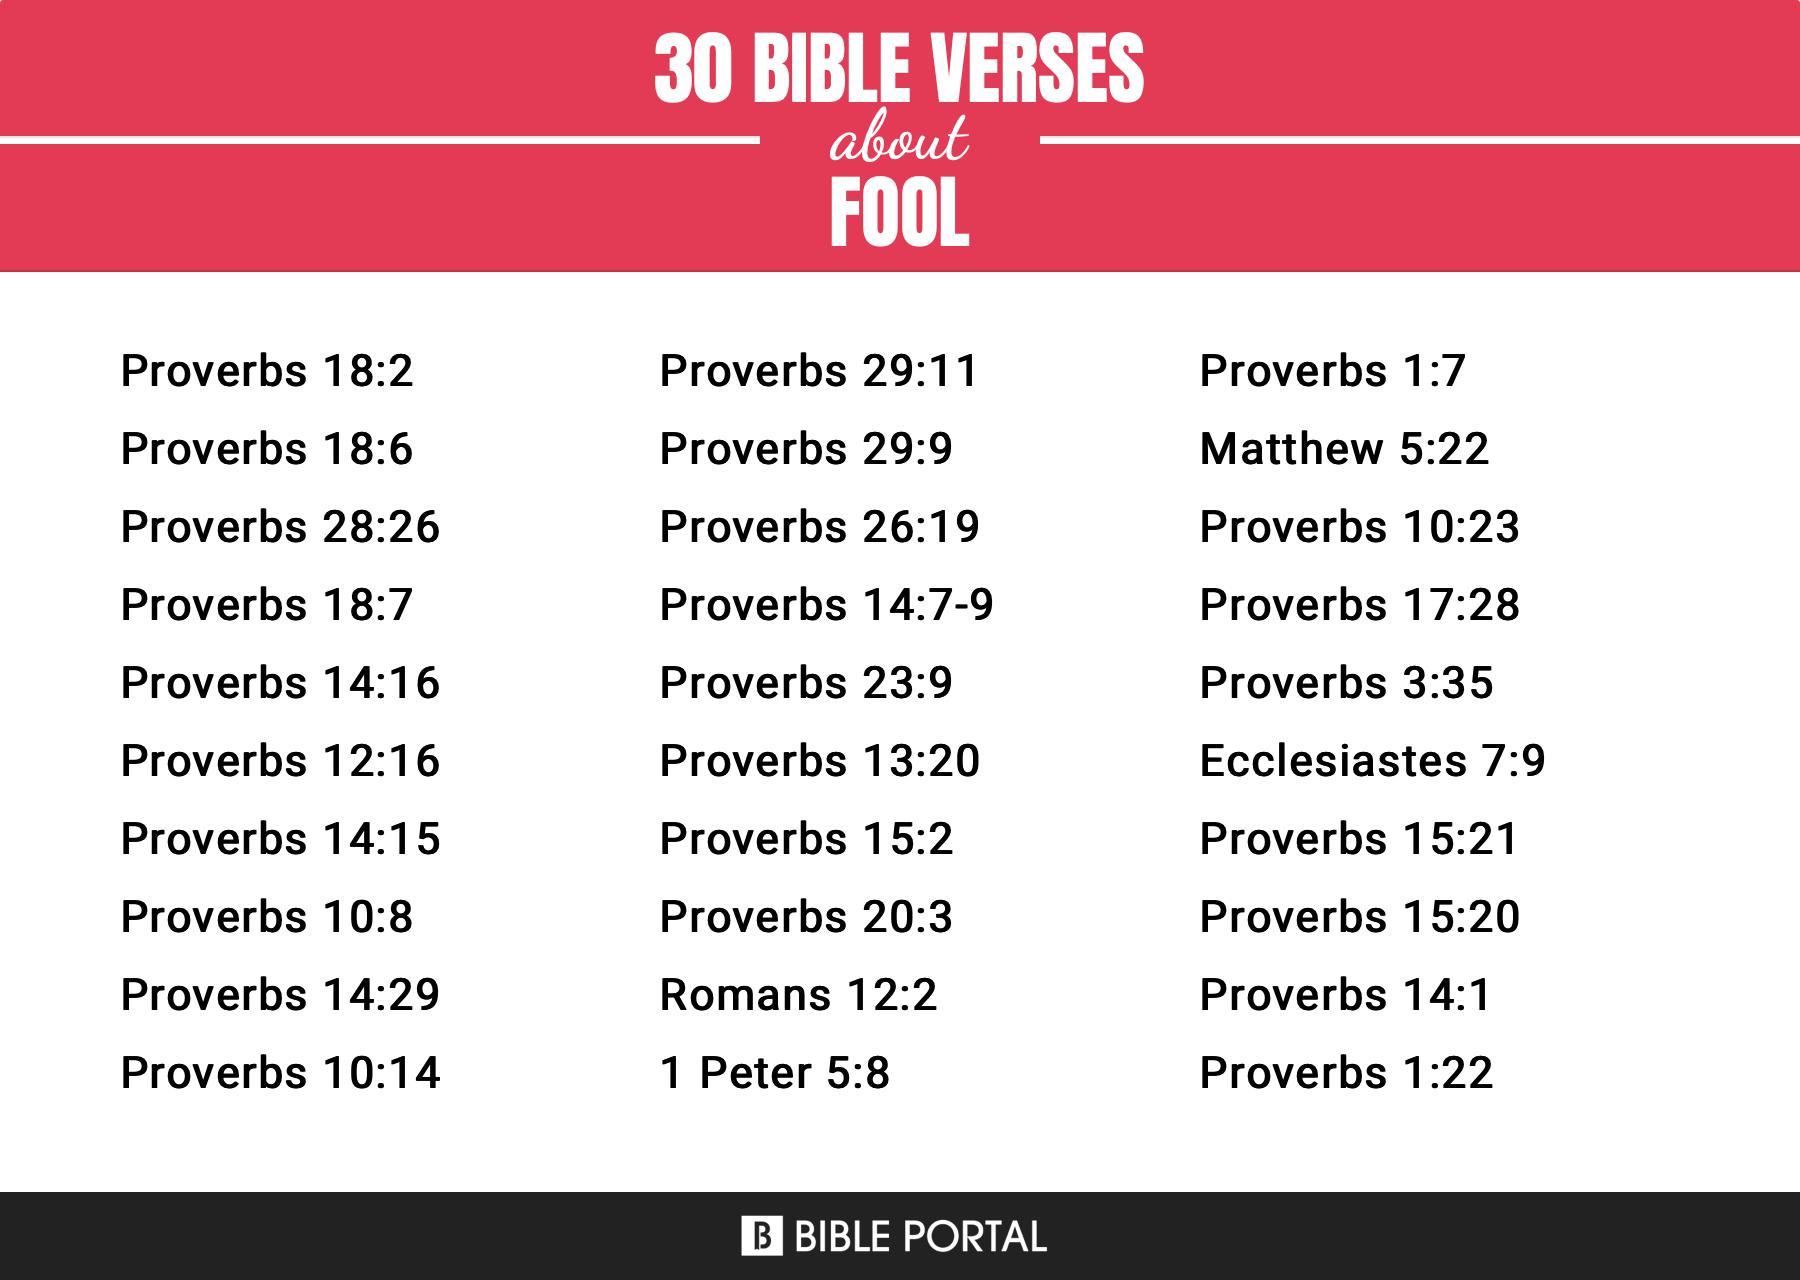 What Does the Bible Say about Fool?